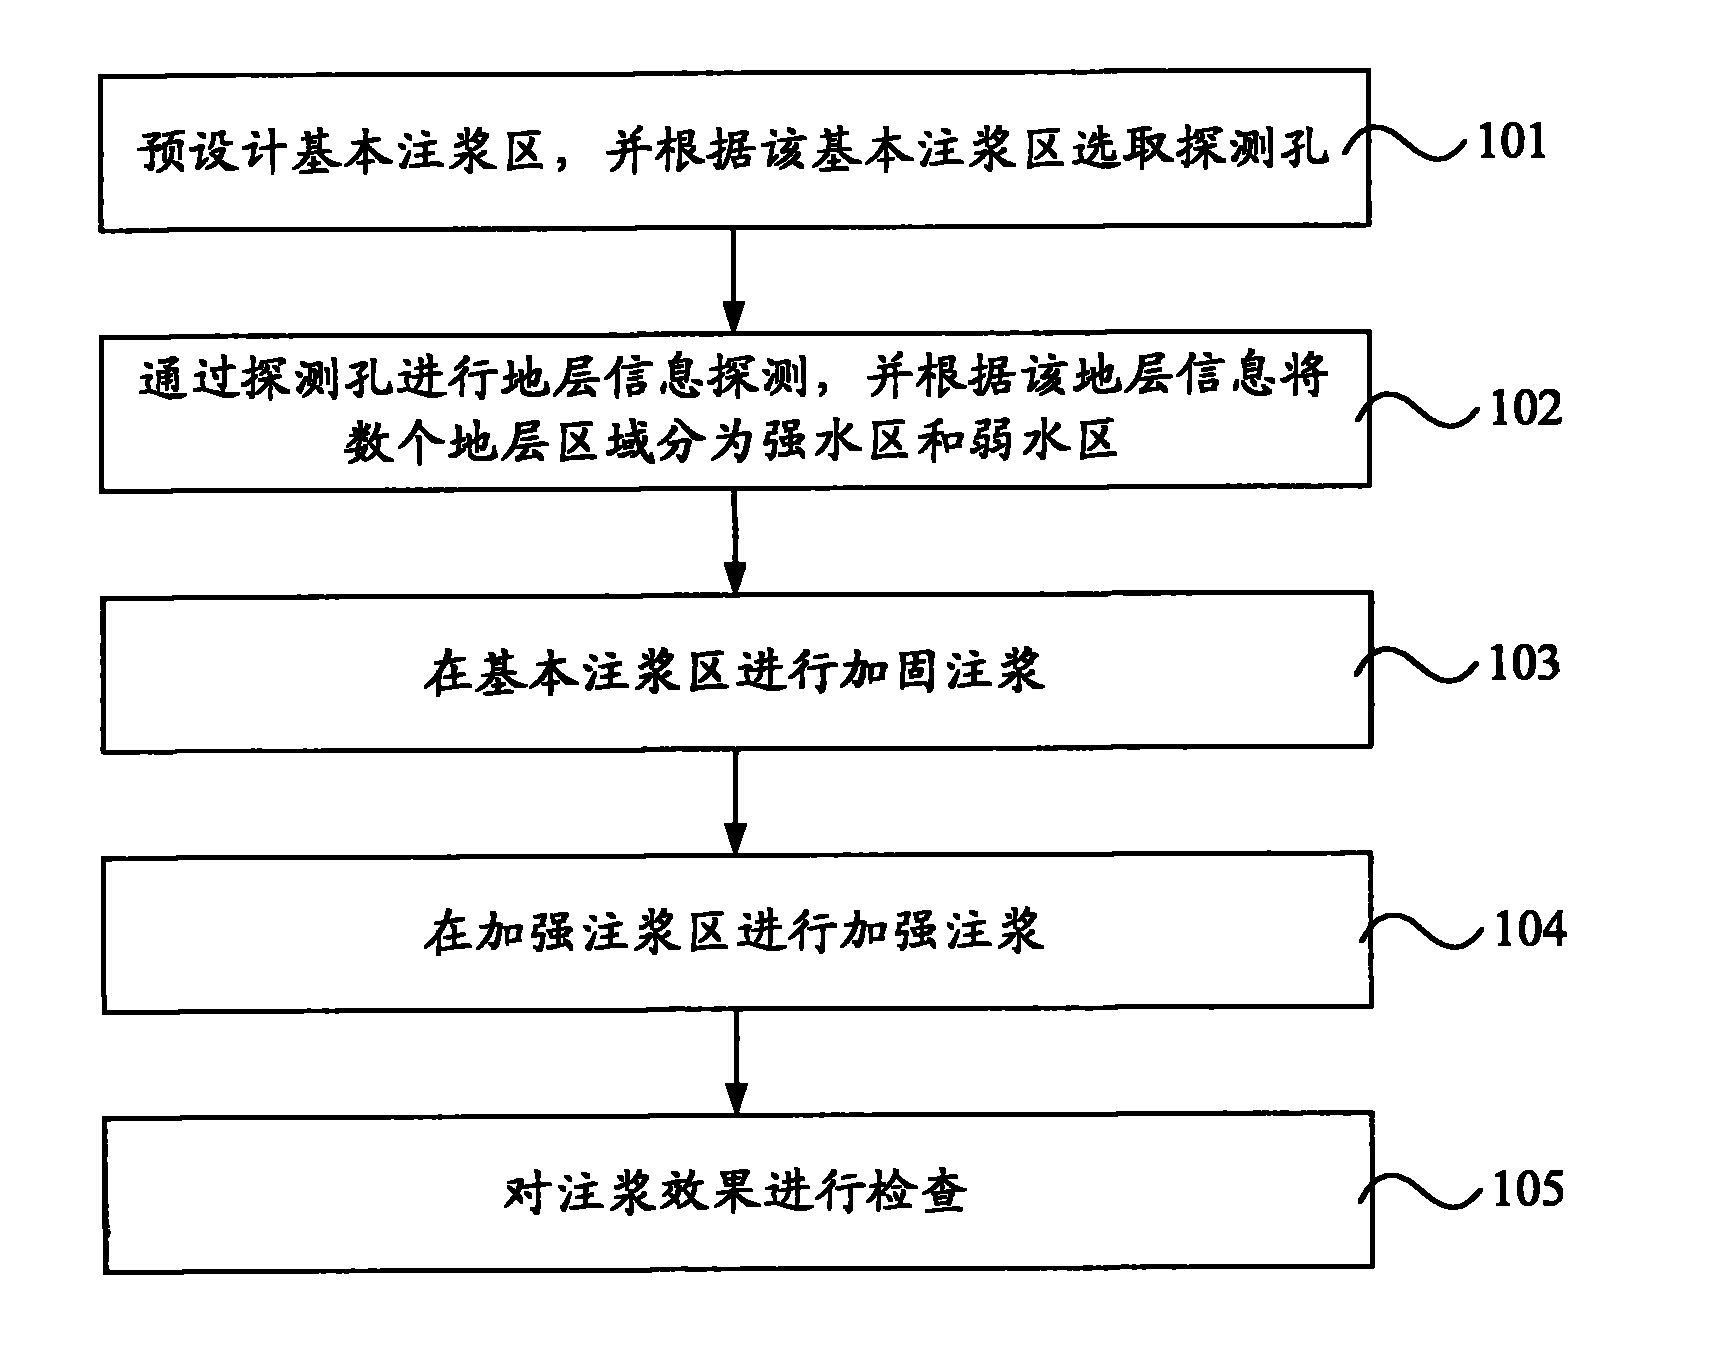 Information tracking grouting method